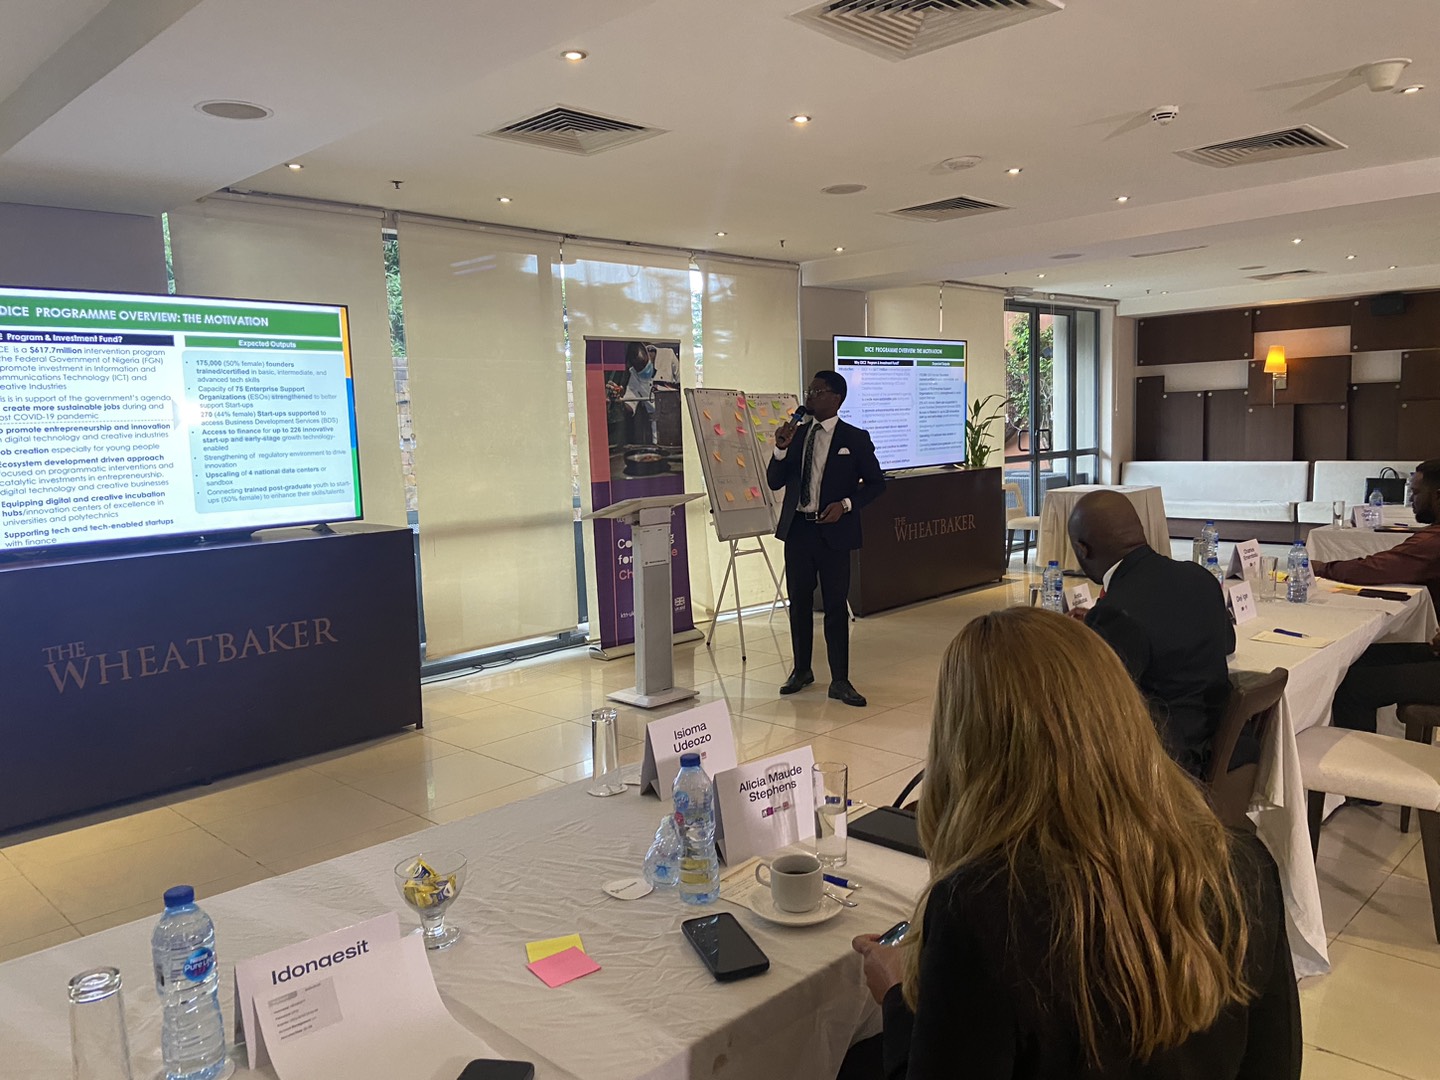 Innovate UK ignites transformation in the Nigerian digital and creative sector with its Development Partner Workshop